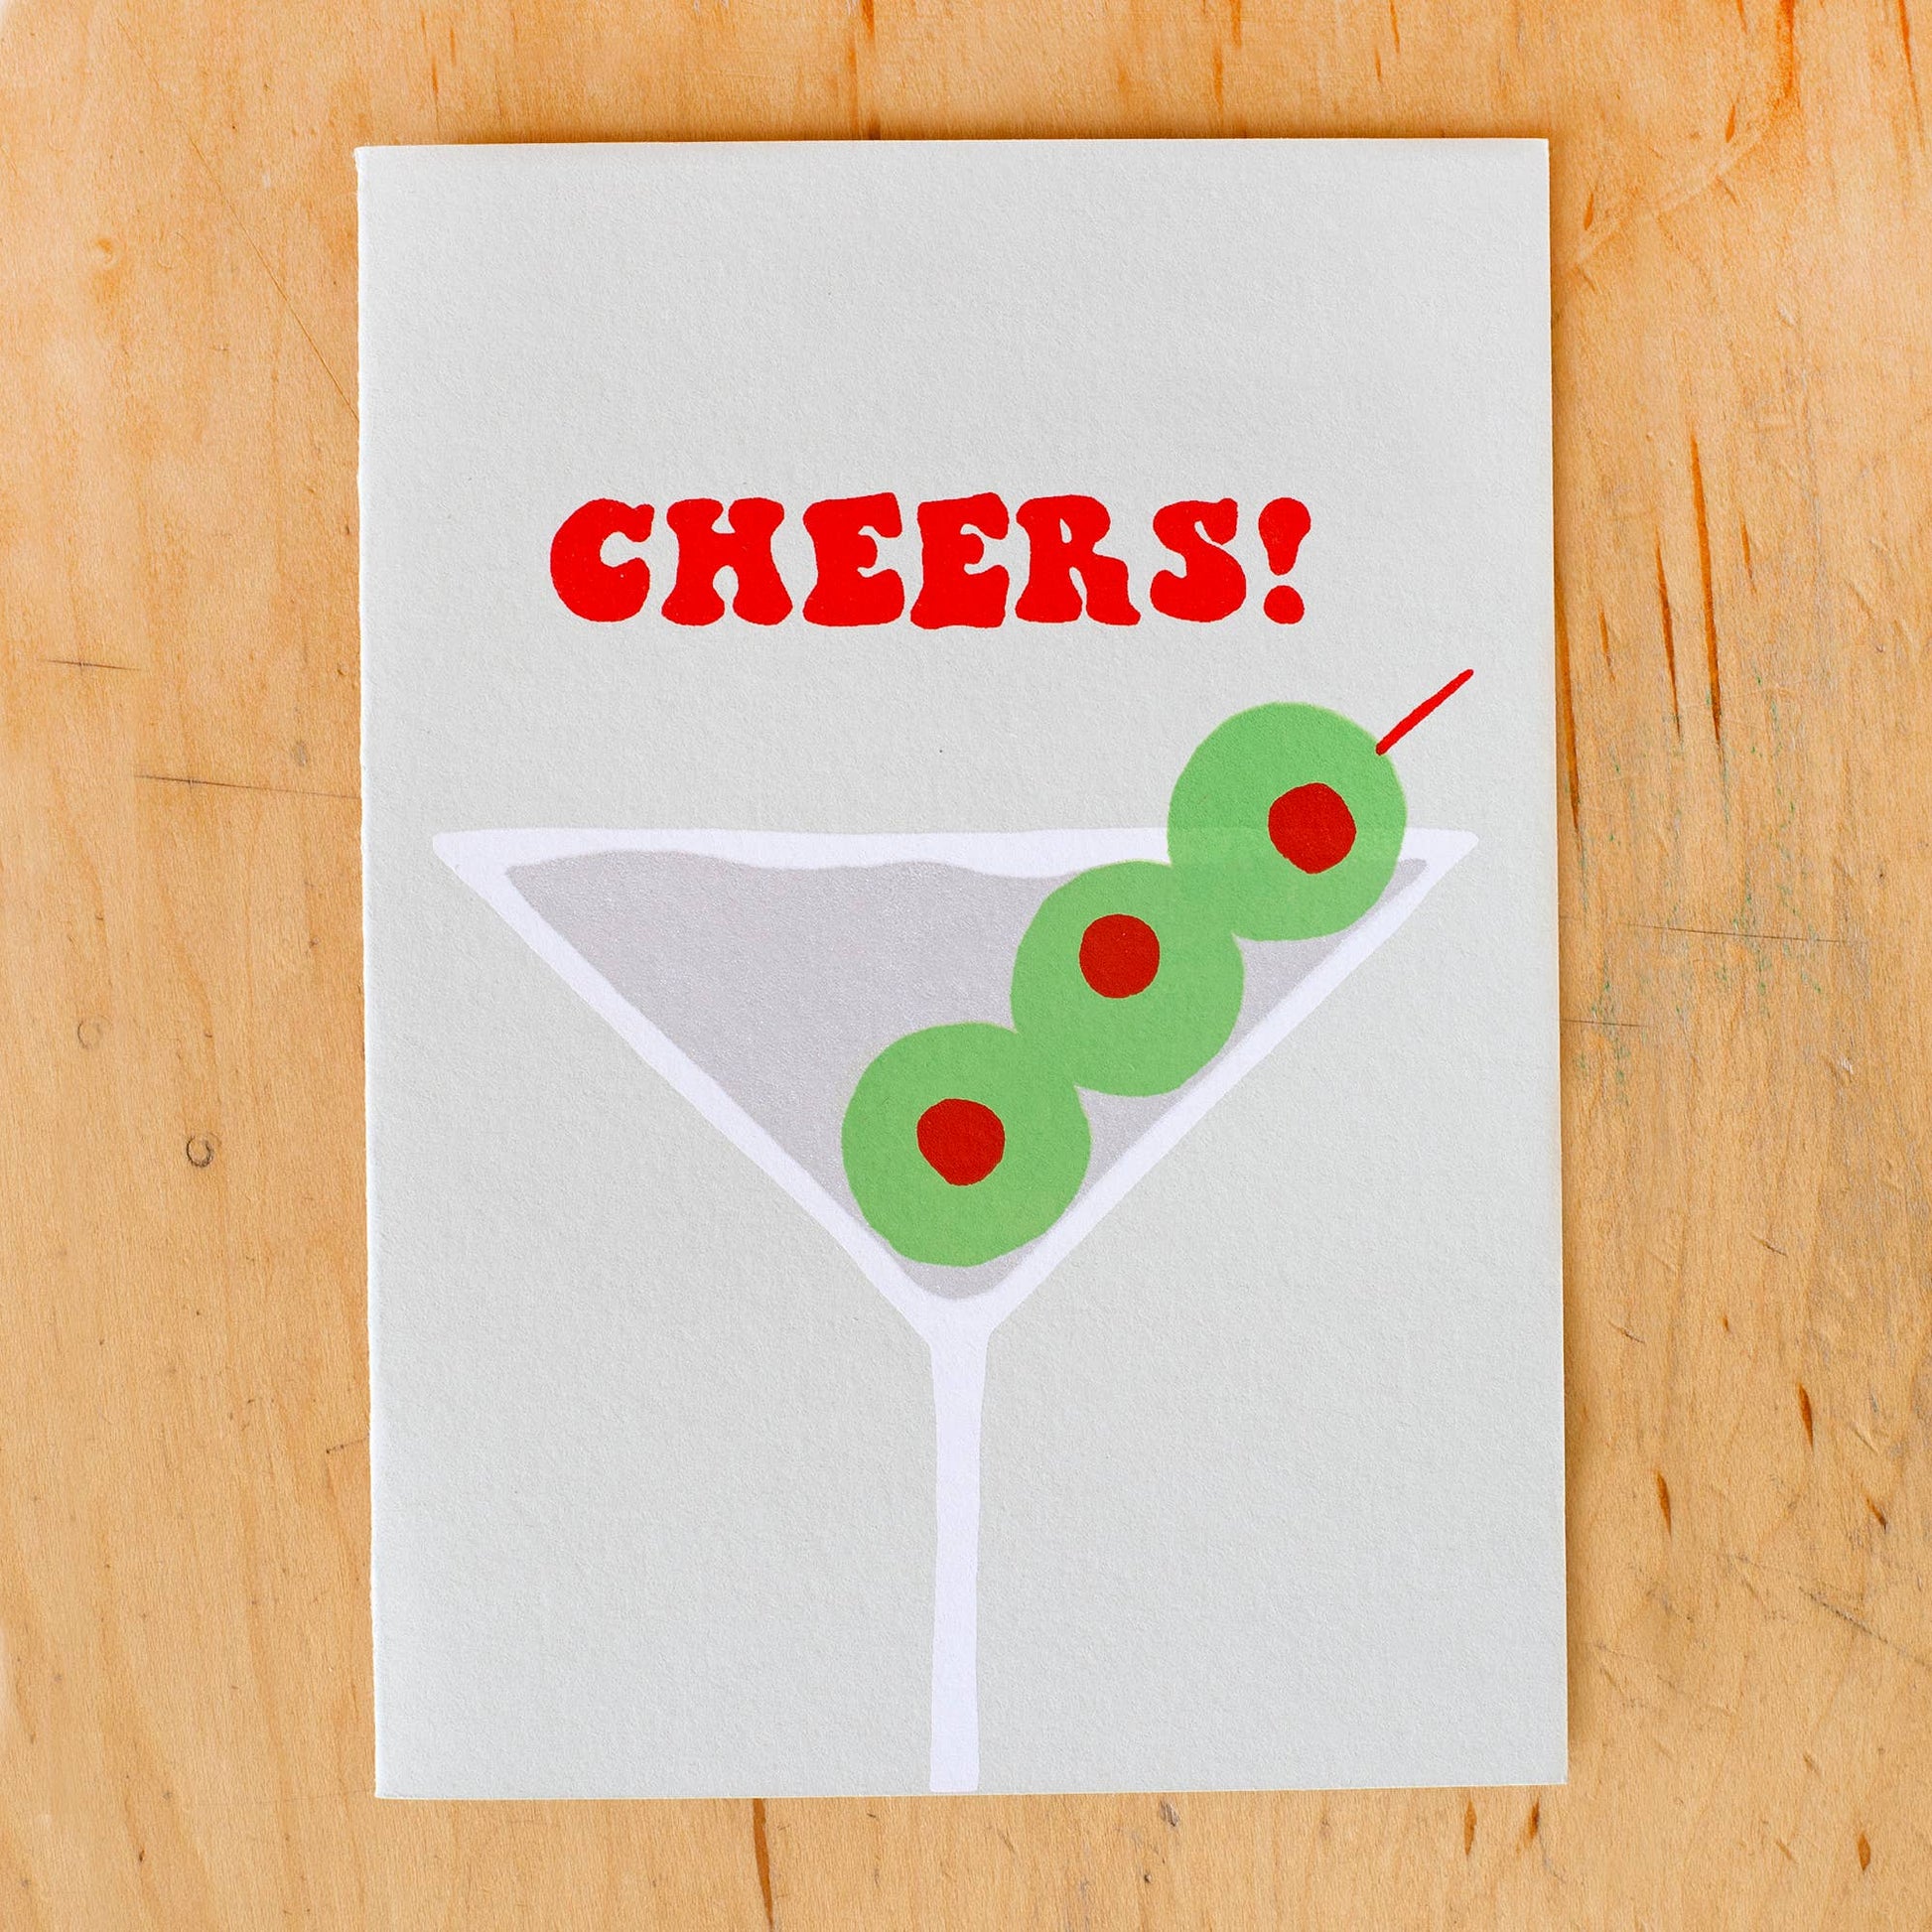 Greeting card that has martini glass with olives on it and reads "Cheers!" in bold red